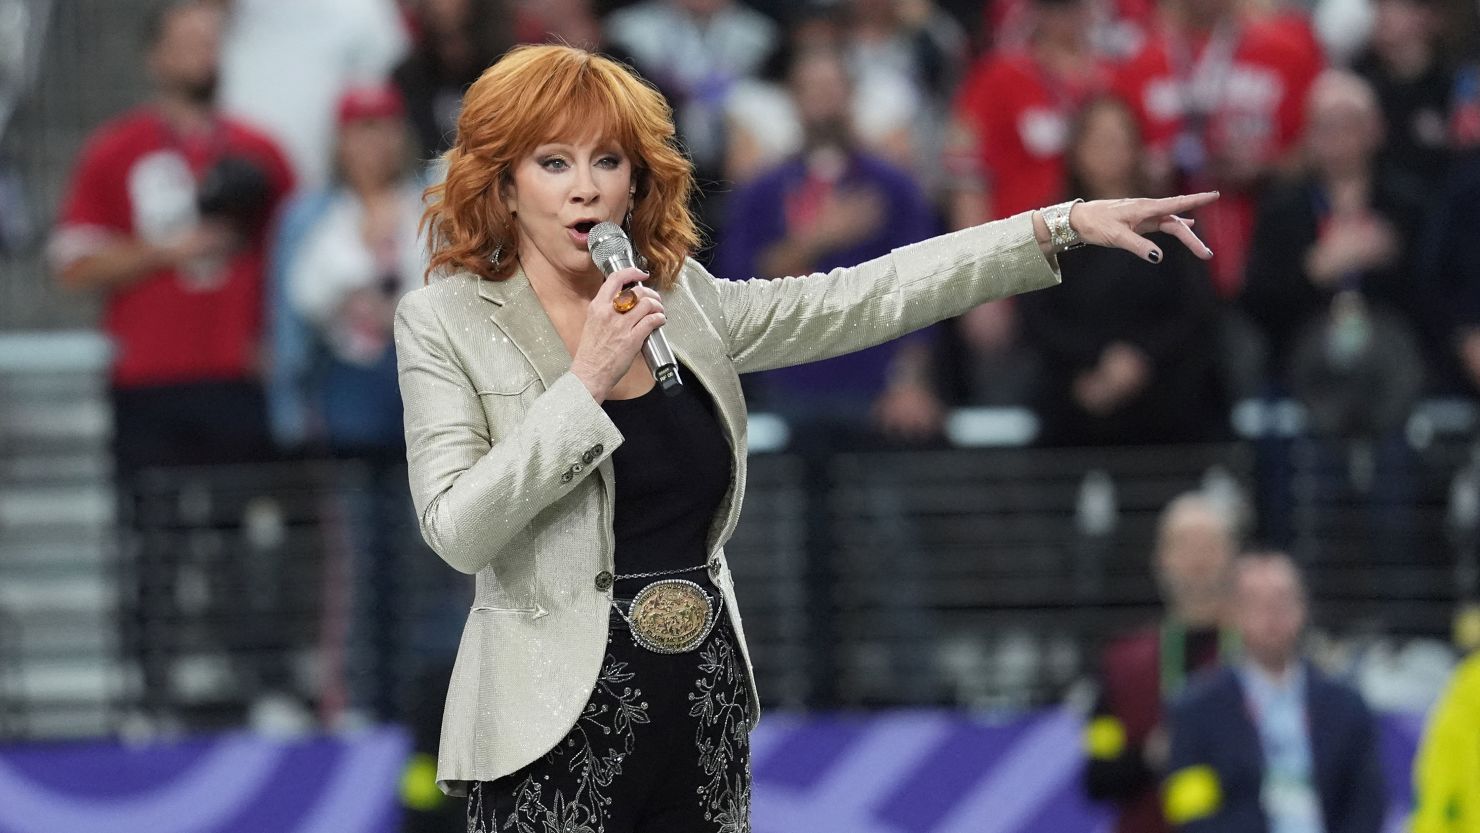 Reba McEntire sings the National Anthem ahead of the Super Bowl on Sunday.